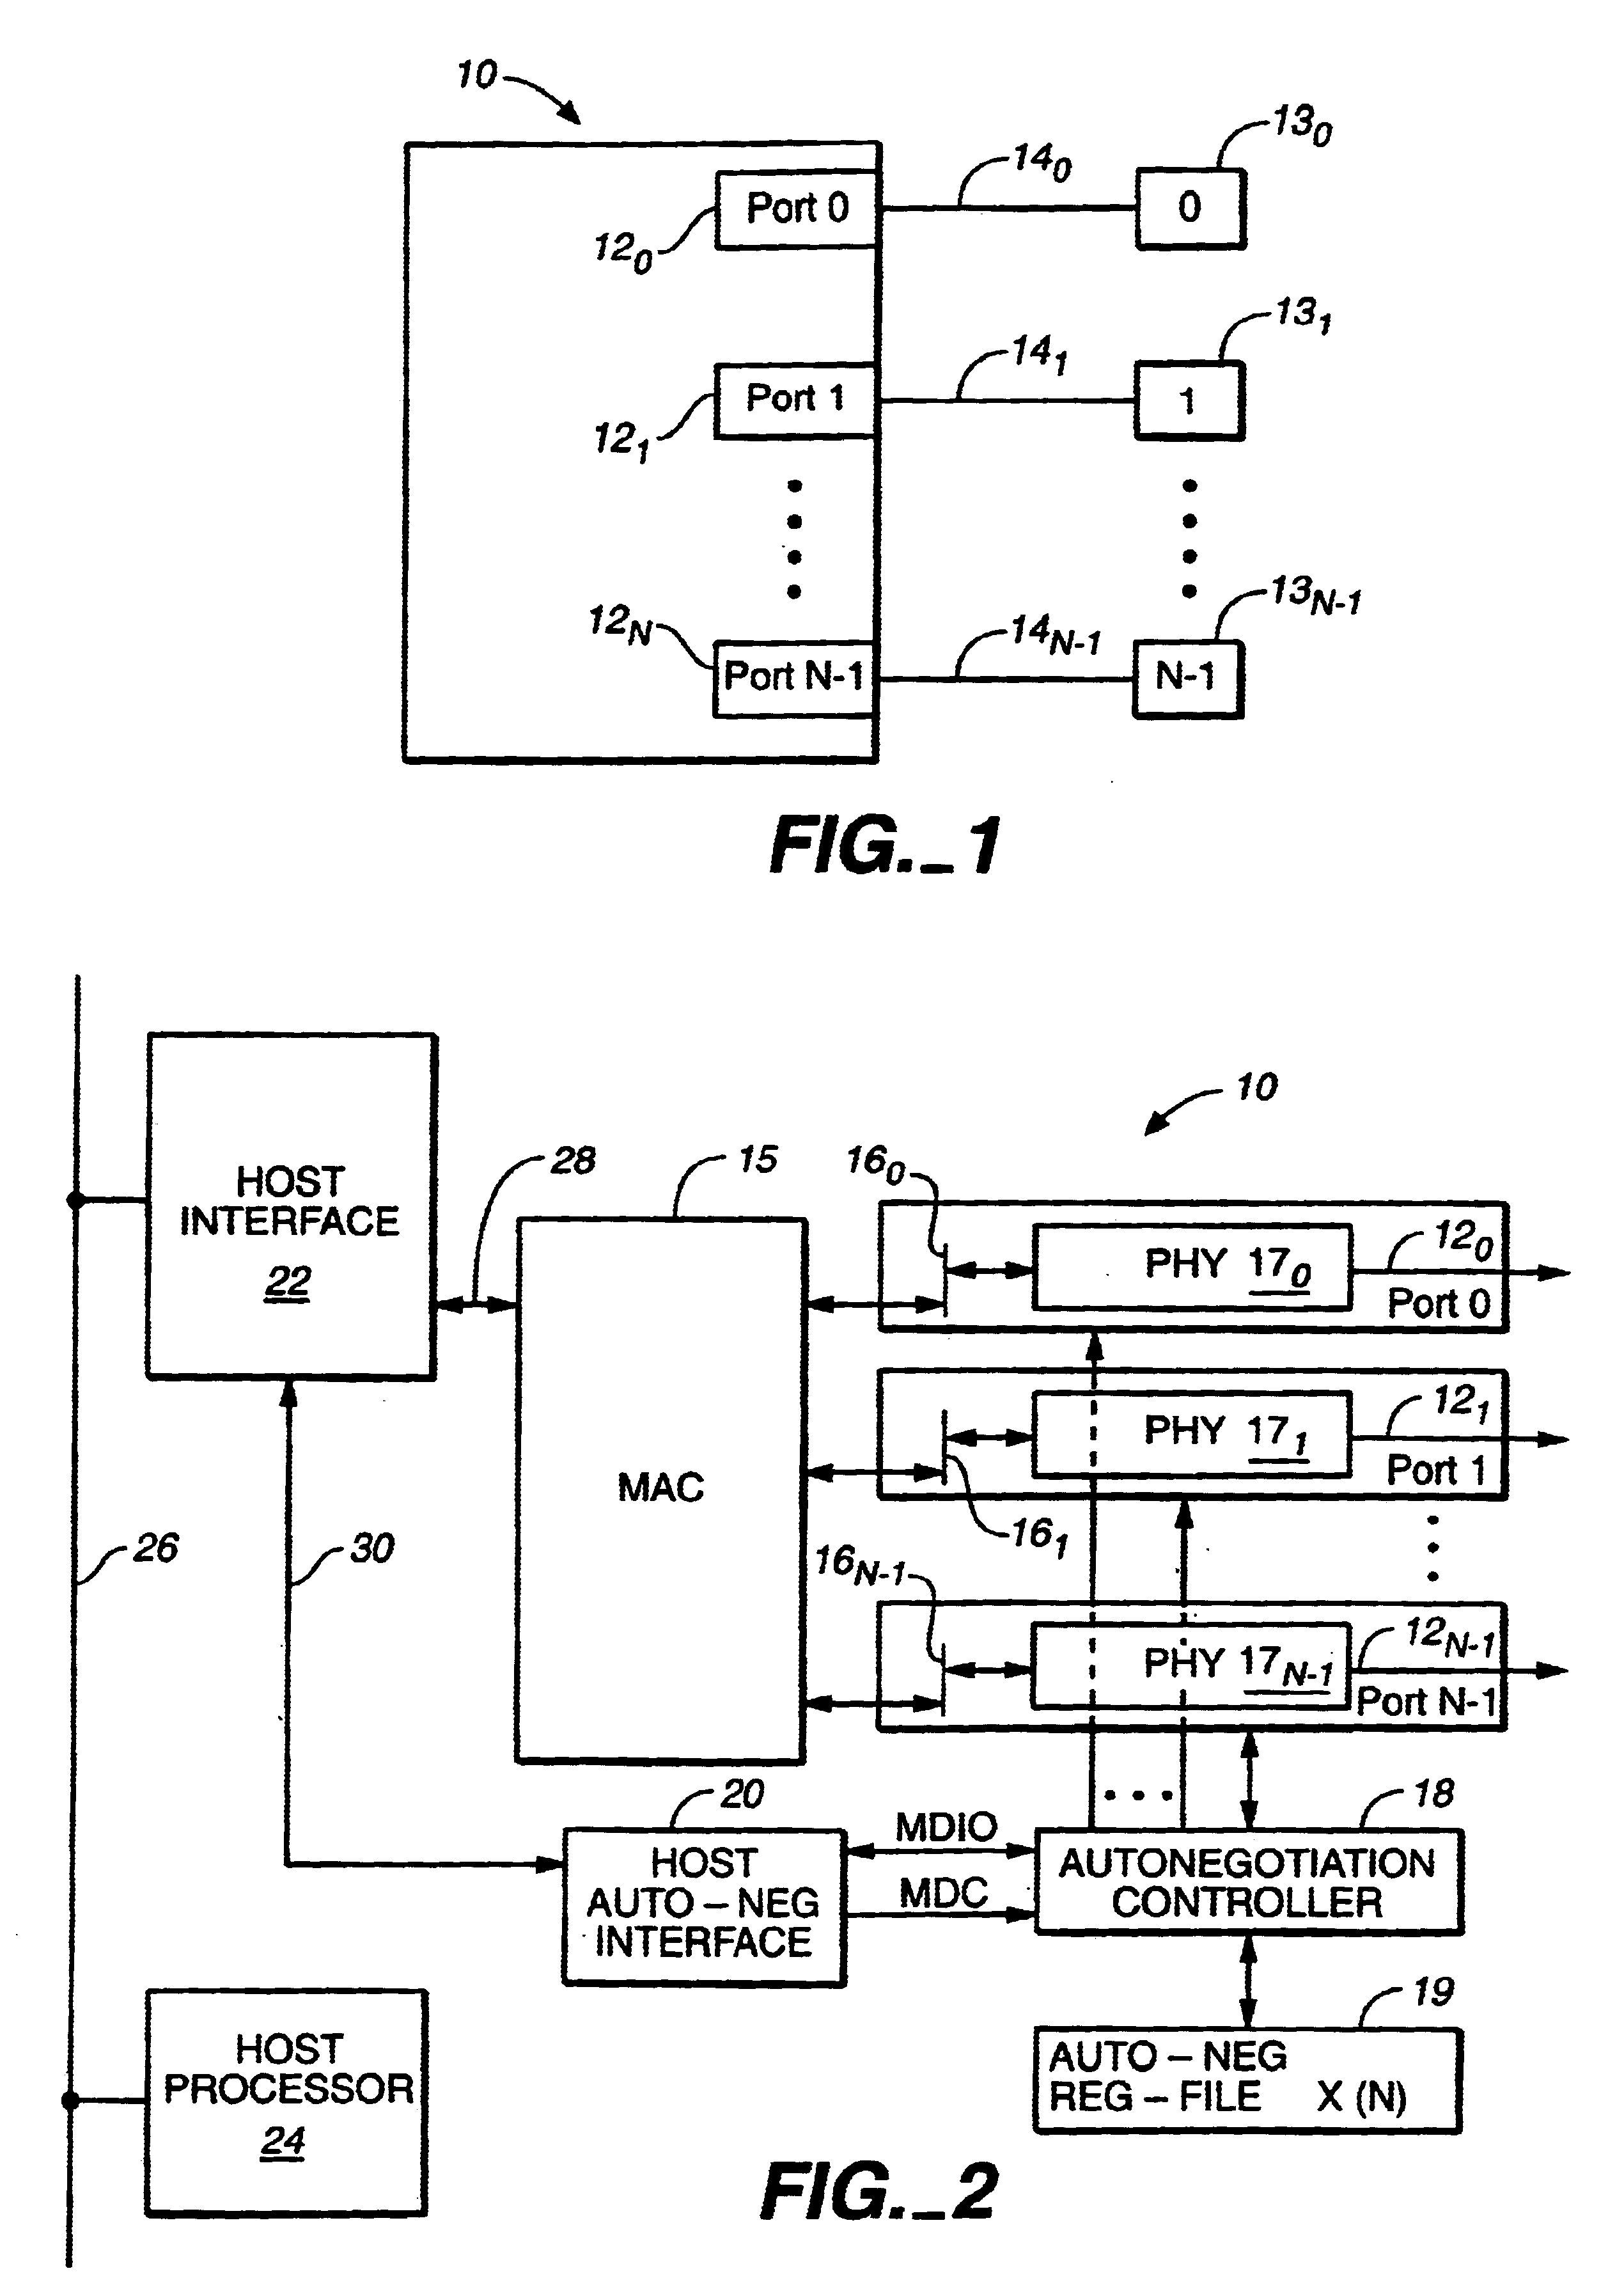 Method for autonegotiating multiple devices with a shared autonegotiation controller